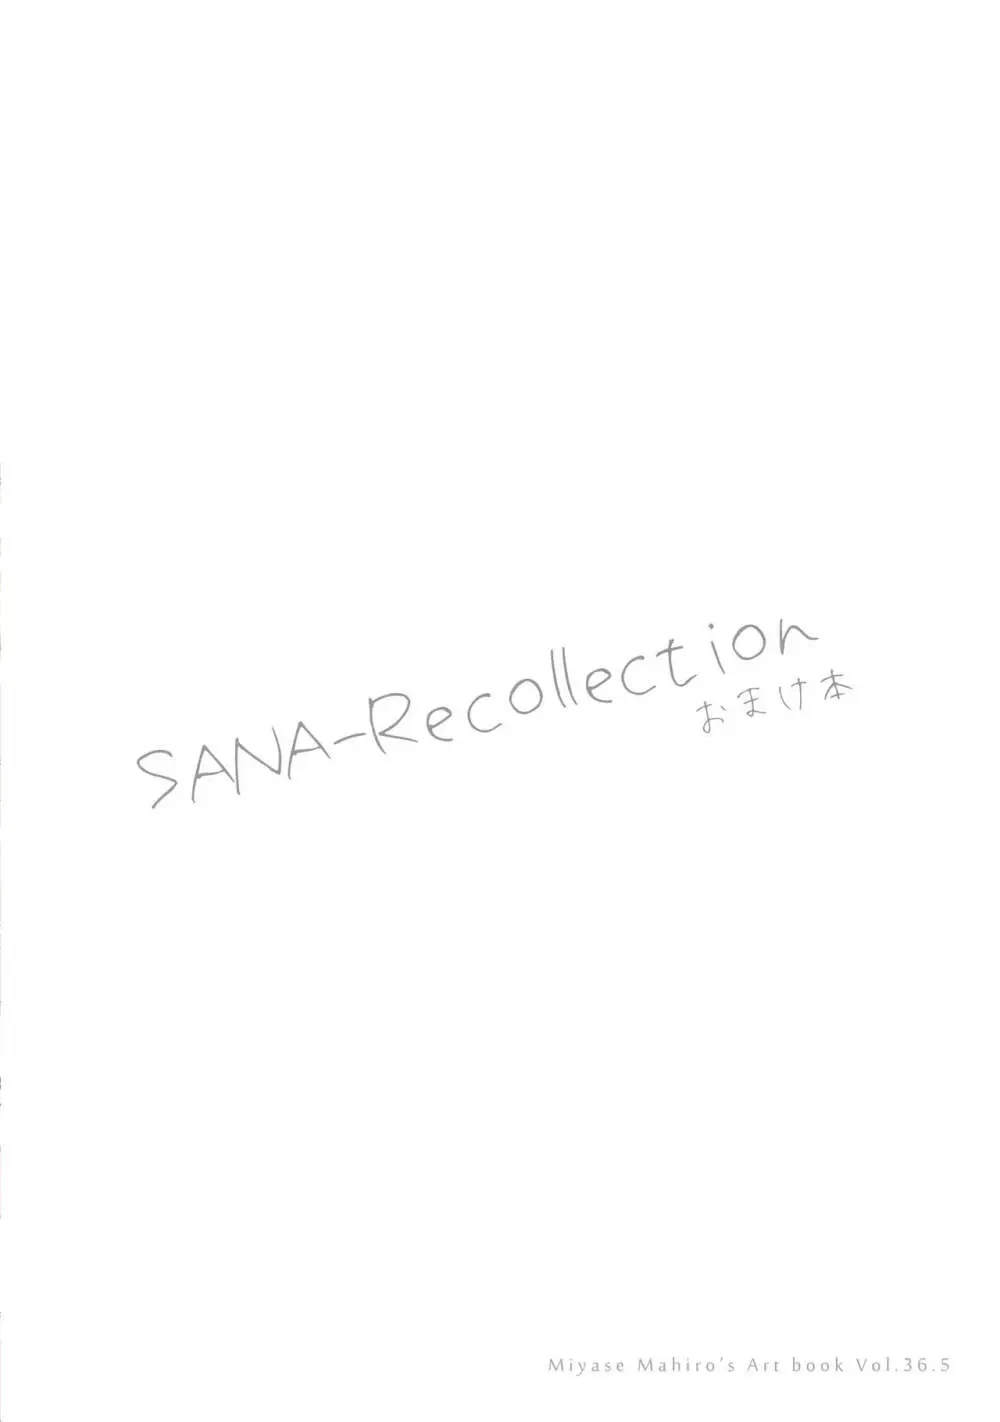 SANA-Recollection + おまけ本 - page98